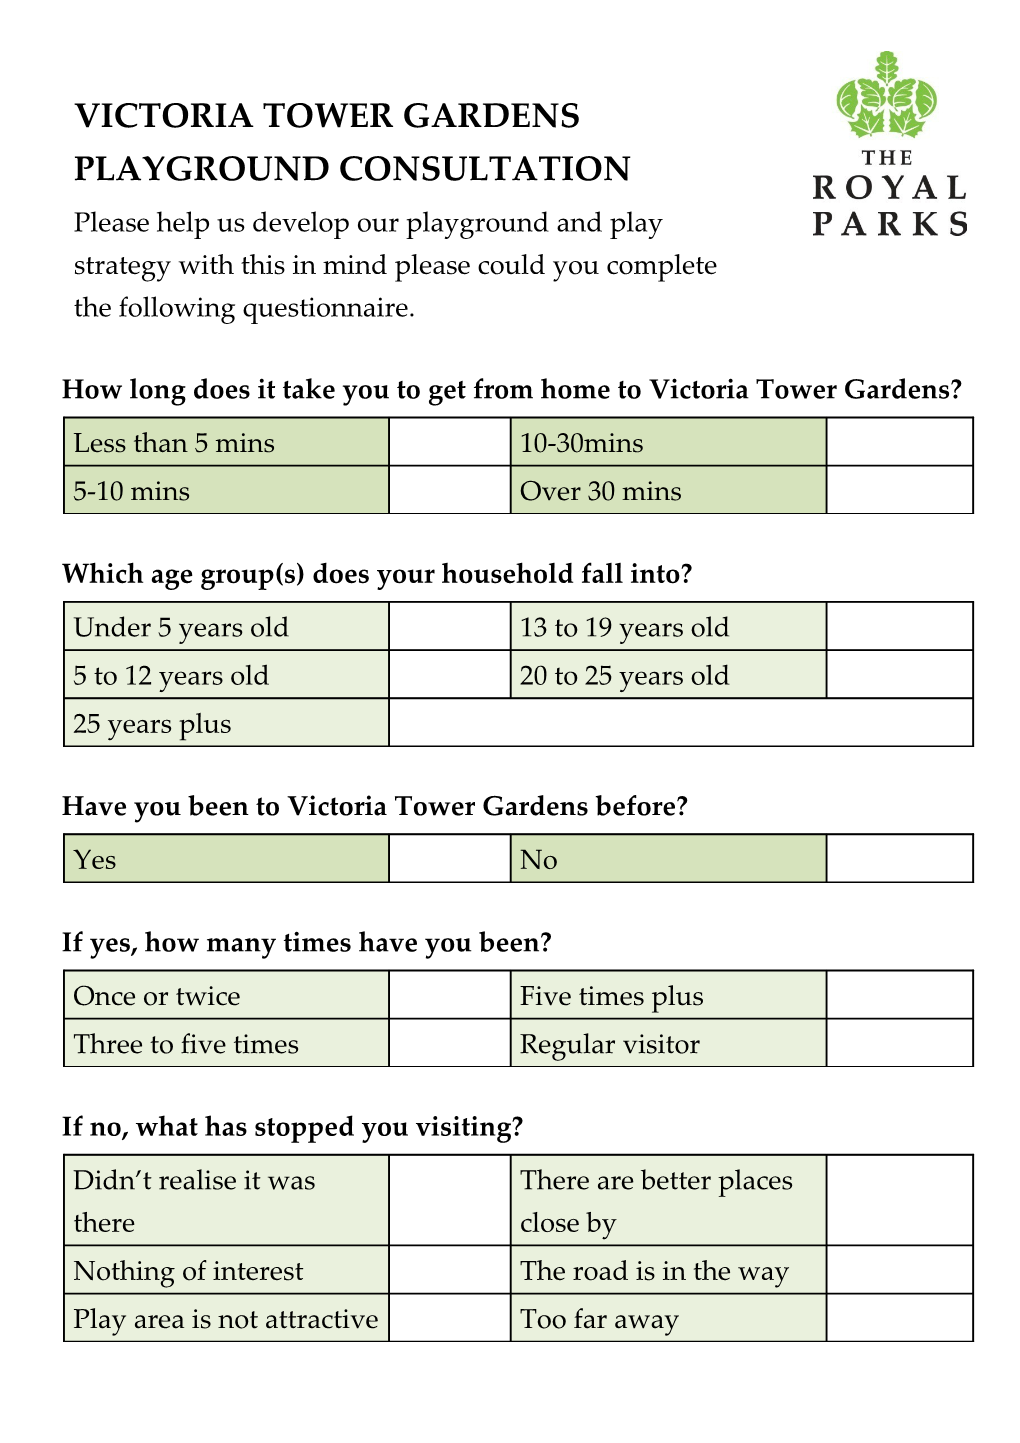 How Long Does It Take You to Get from Home to Victoria Tower Gardens?